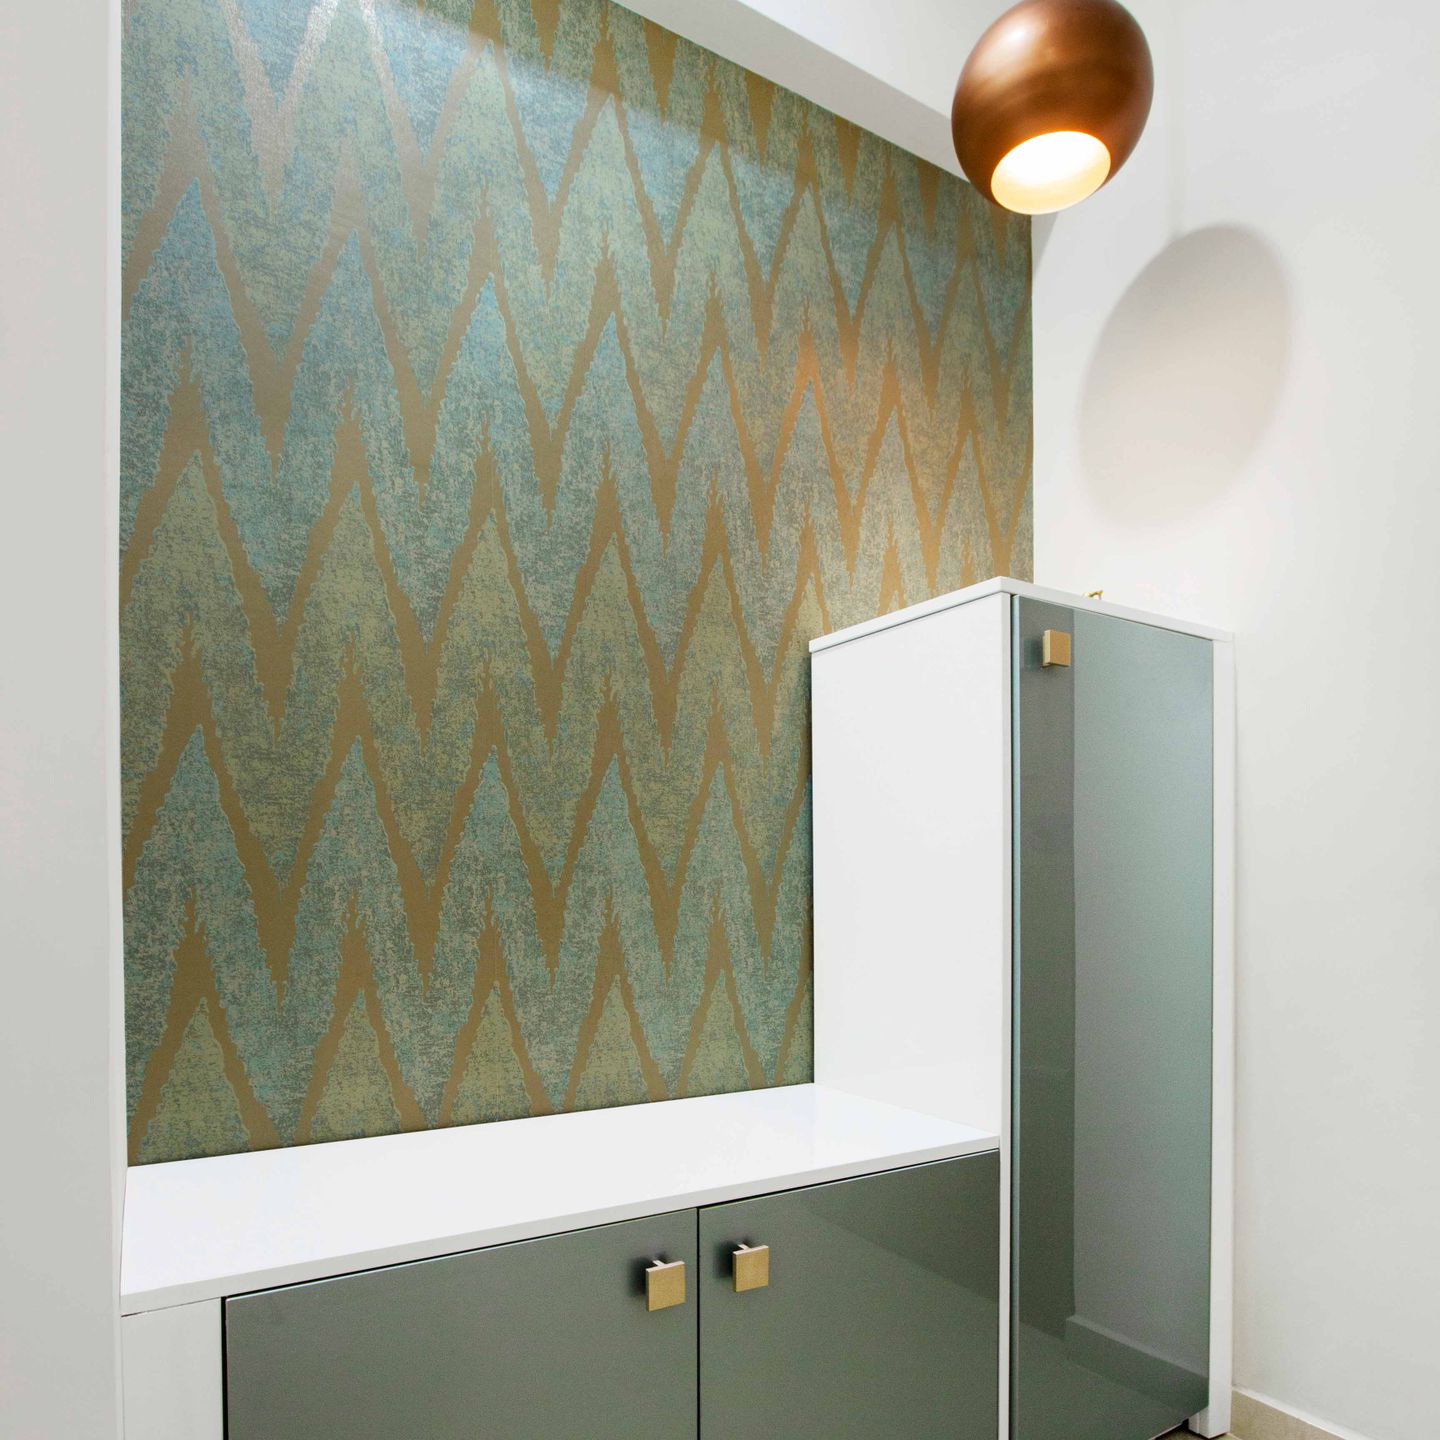 3x5 Ft Foyer Design With Metallic Blue Wallpaper And Gold Zig-Zag Lines - Livspace